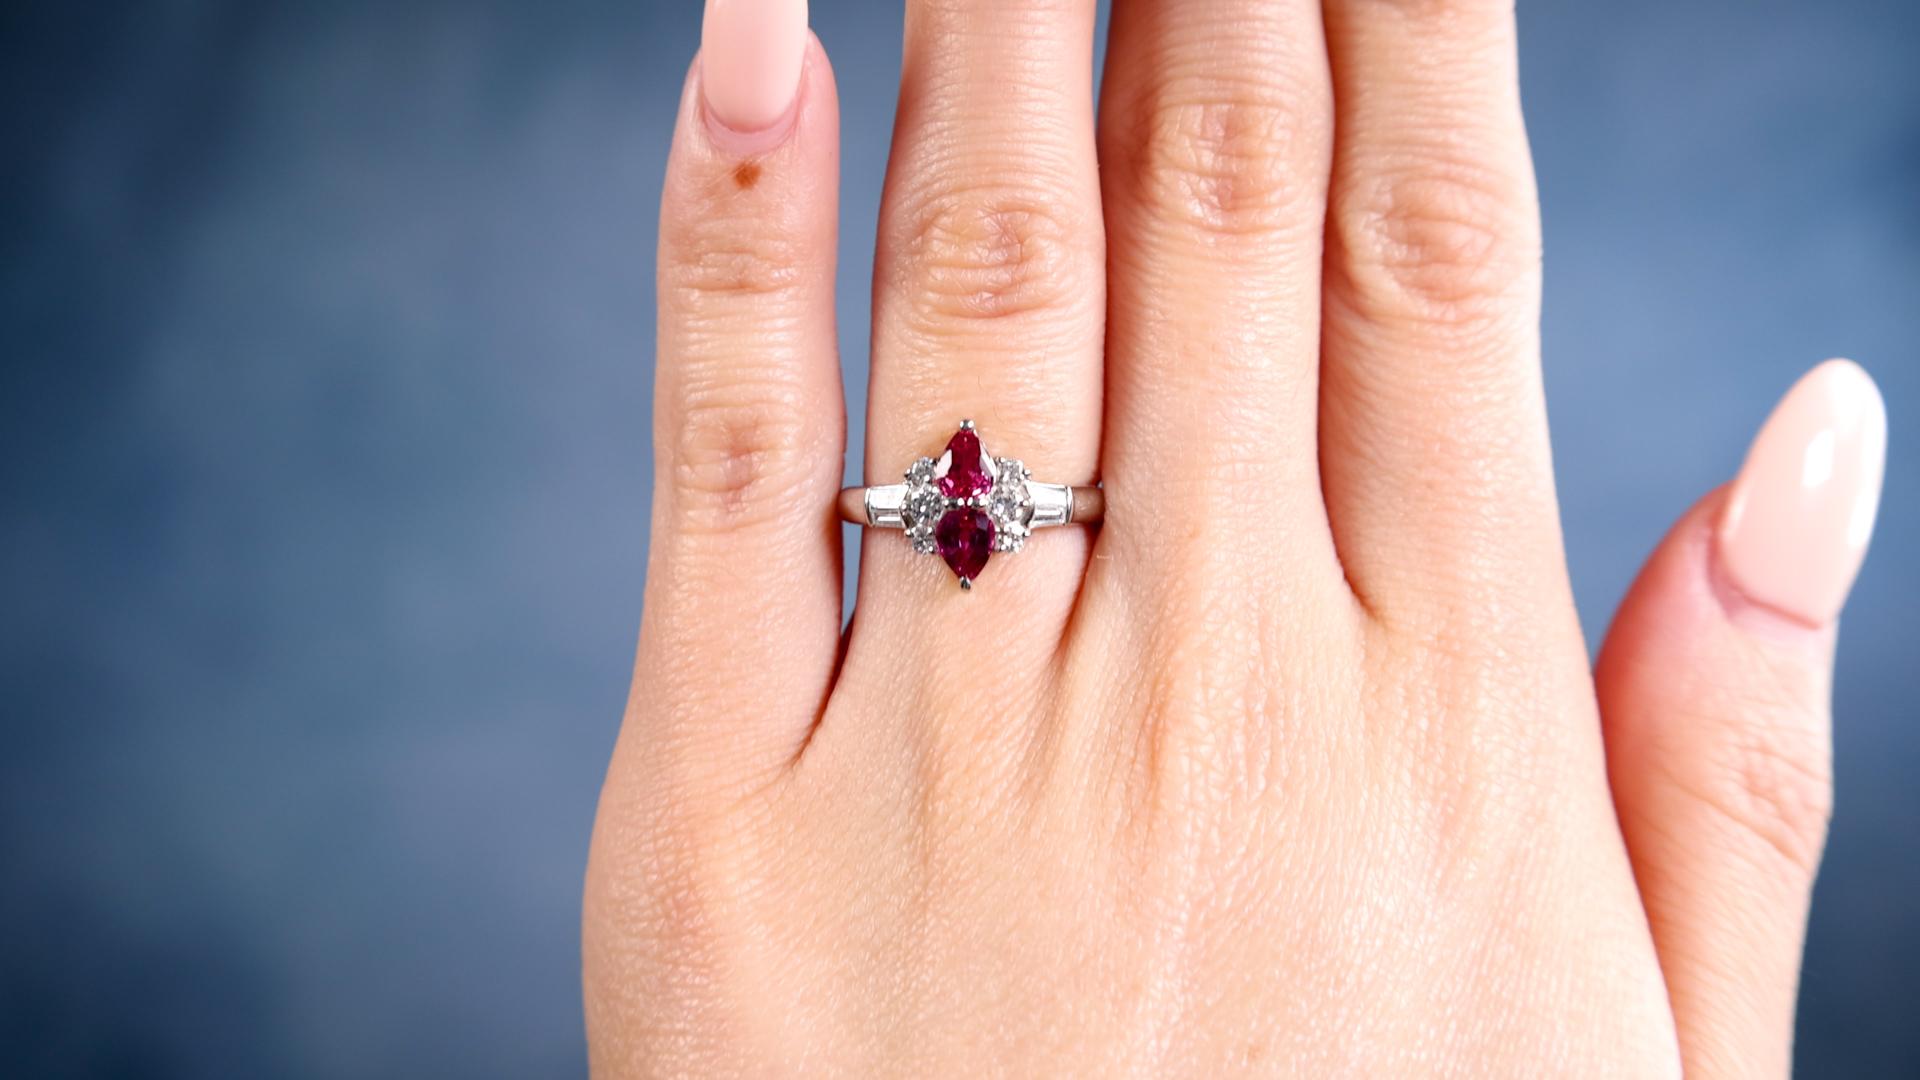 One Ruby and Diamond Platinum Ring. Featuring two pear cut rubies with a total weight of 0.80 carat. Accented by six round brilliant cut and four tapered cut diamonds with a total weight of 0.37 carat, graded colorless, VS-SI clarity. Crafted in